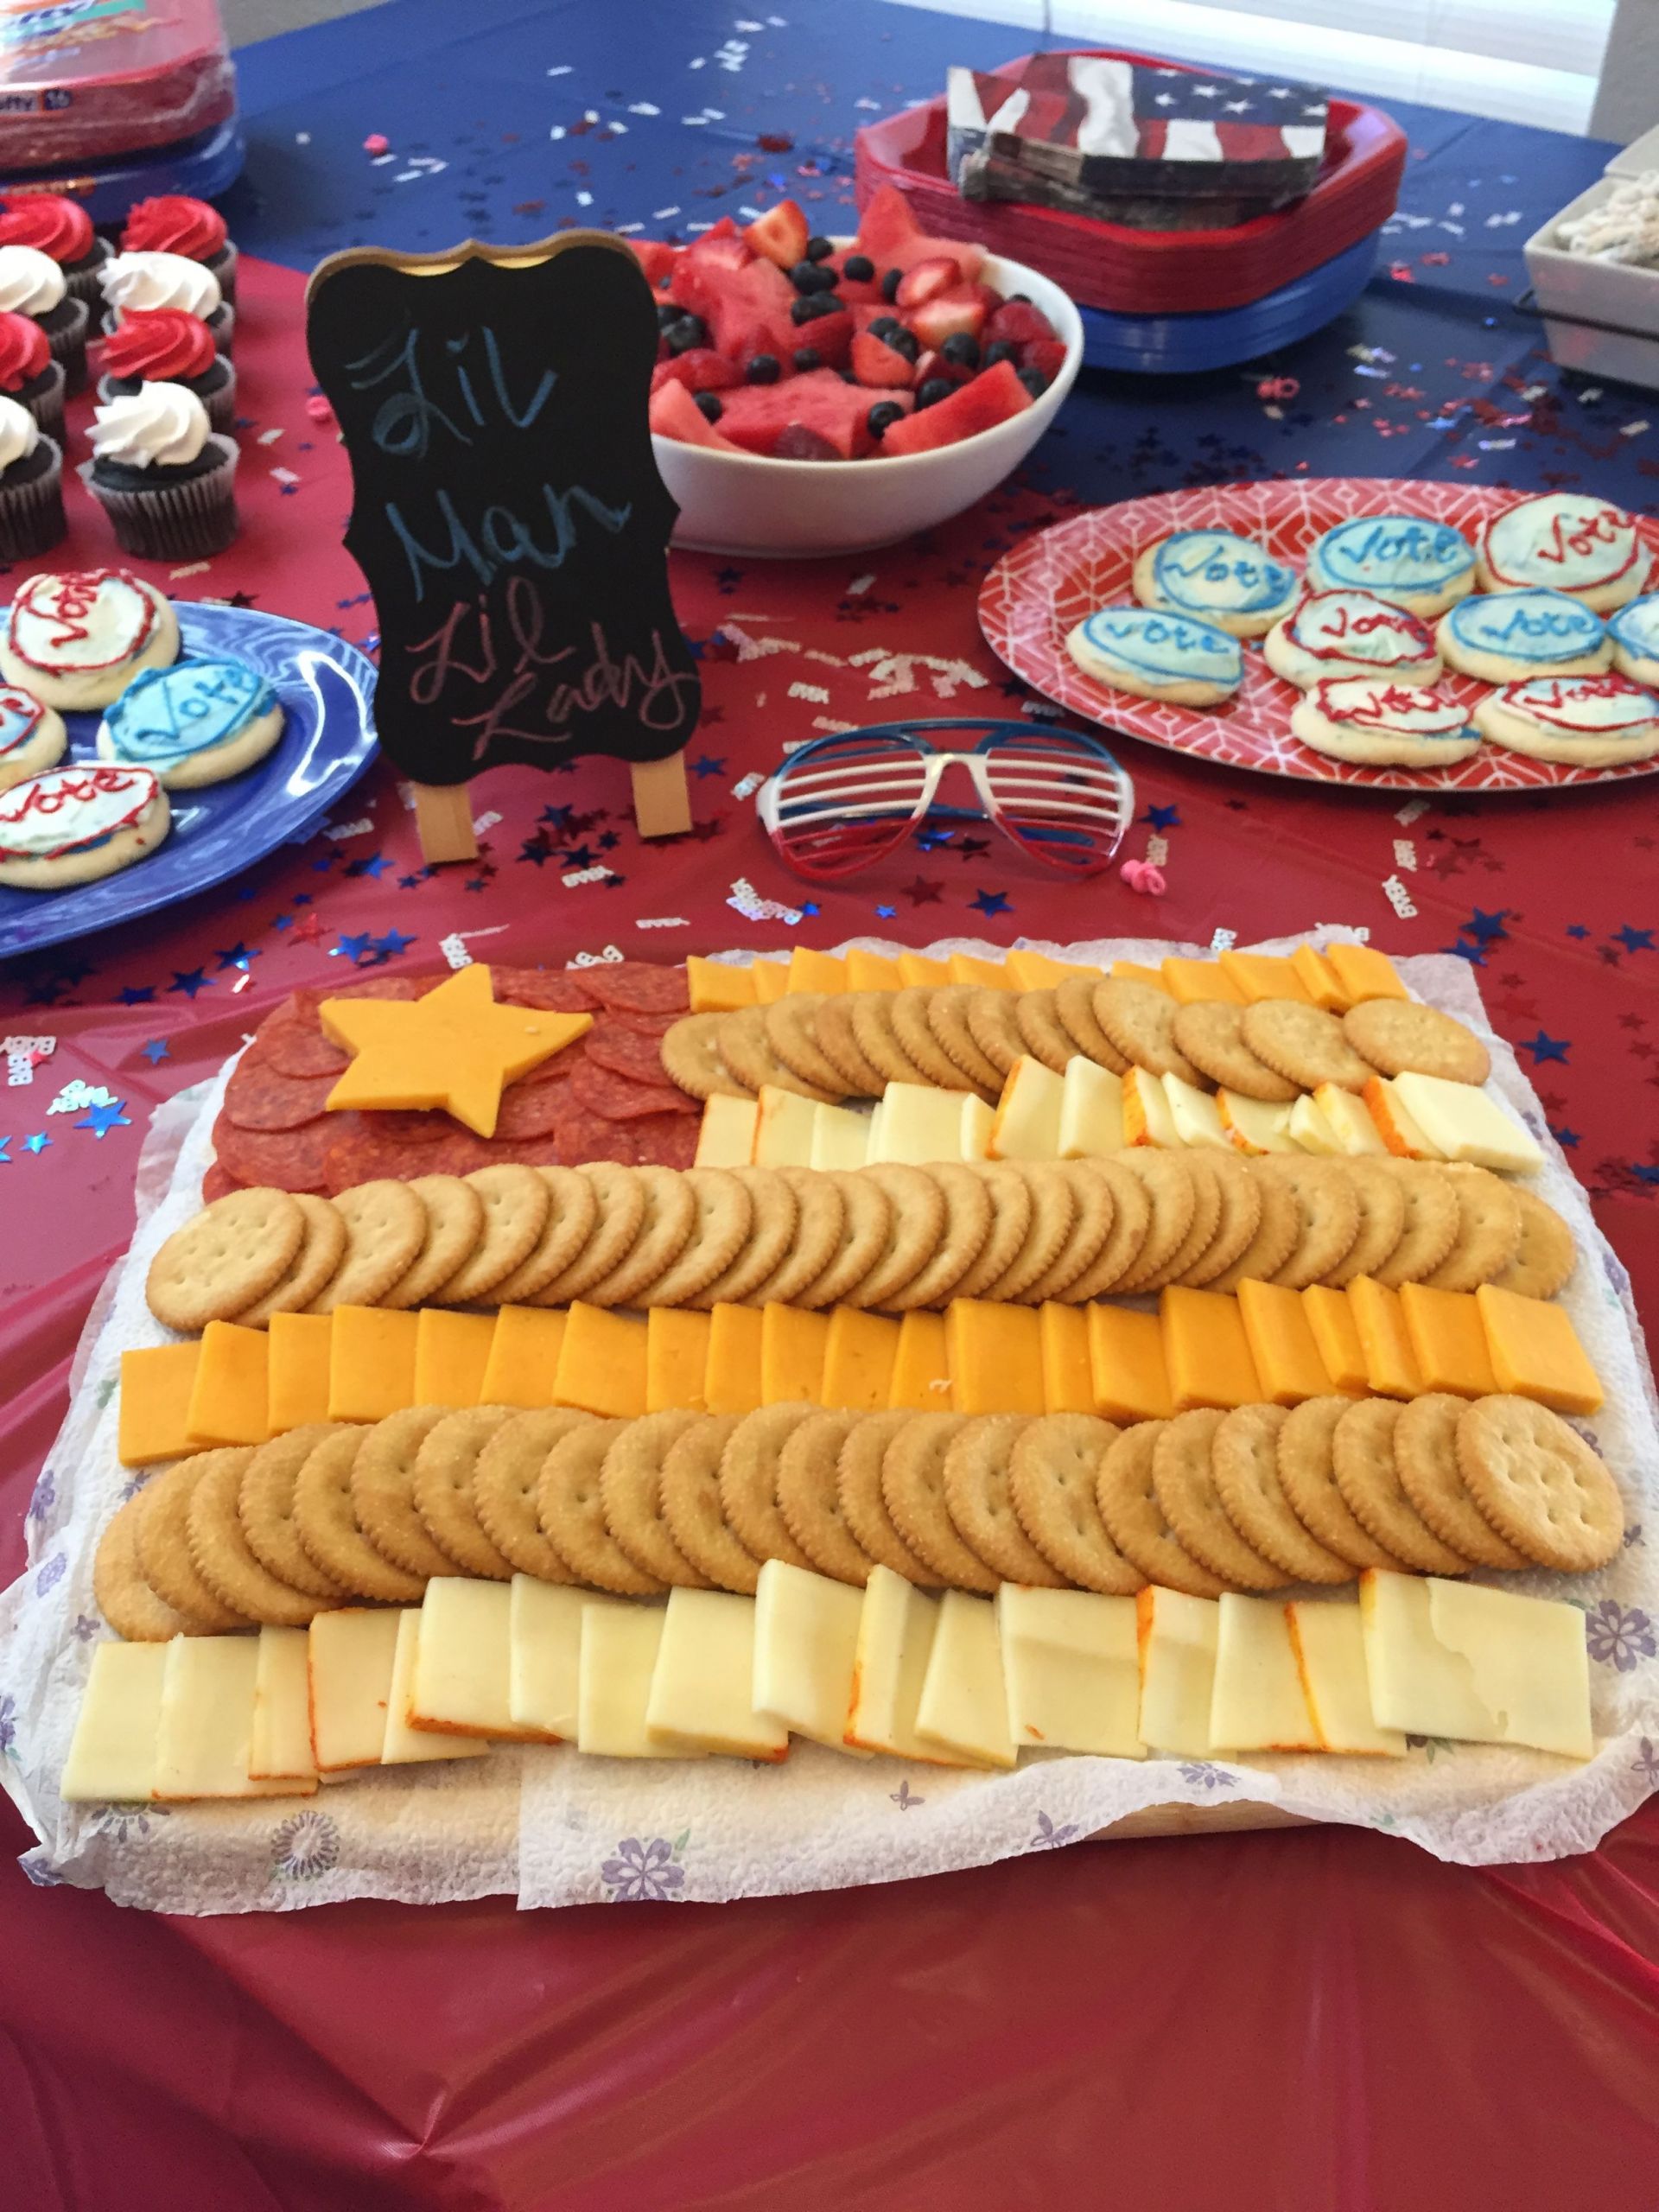 Baby Gender Party Food Ideas
 Gender reveal finger foods 4th of July themed